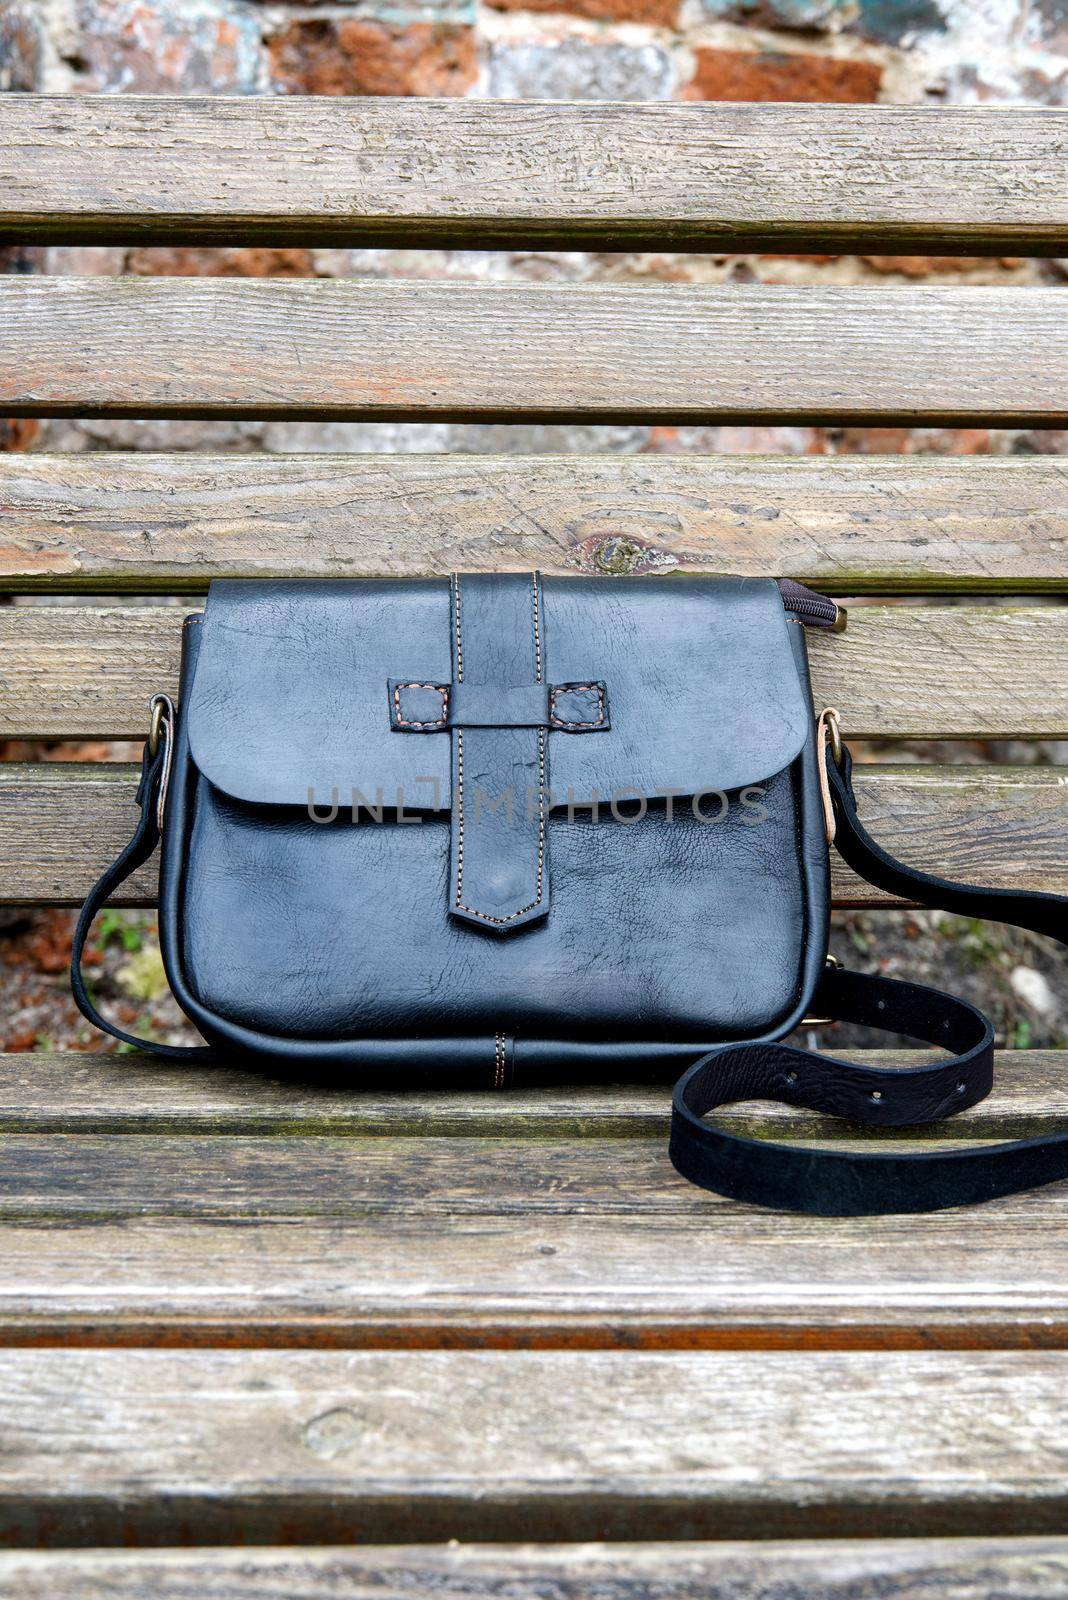 close-up photo of black leather handbag on a wooden bench. Outdoors photo